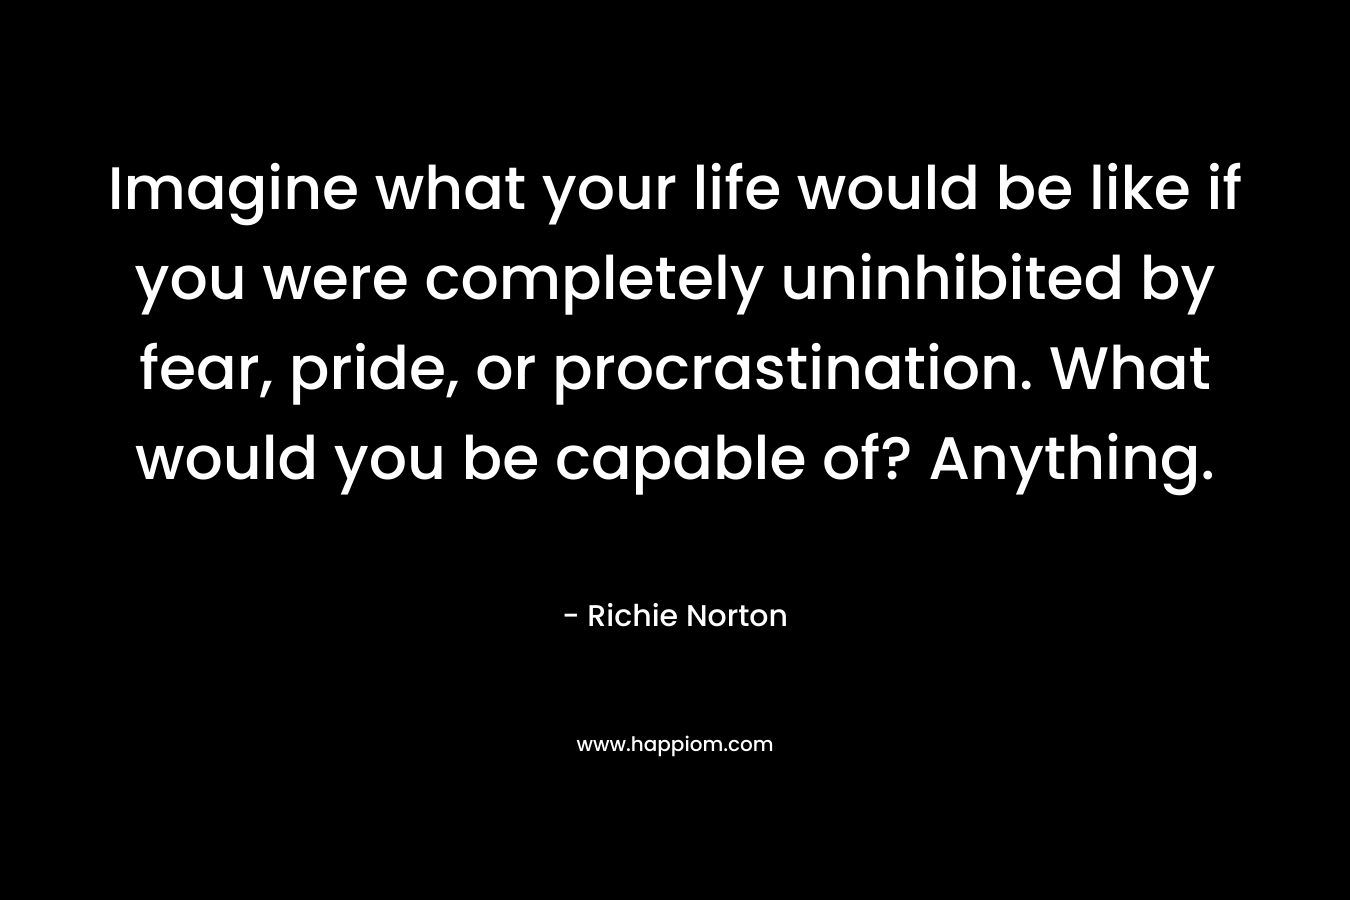 Imagine what your life would be like if you were completely uninhibited by fear, pride, or procrastination. What would you be capable of? Anything.